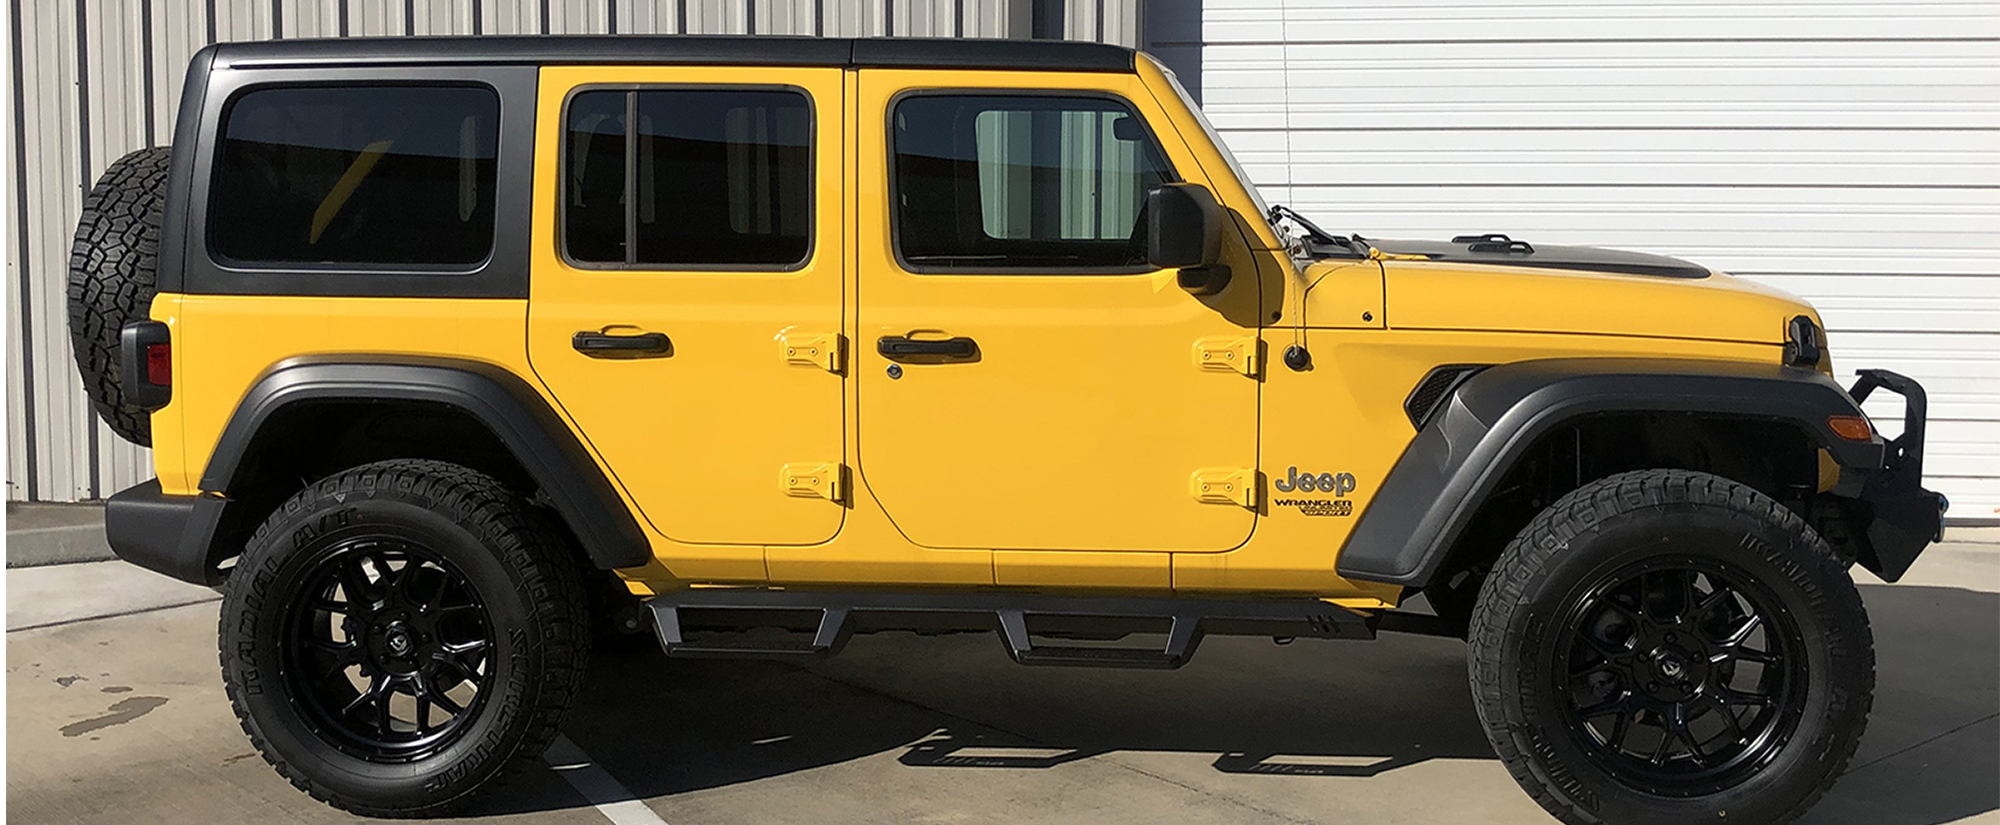 2020 Yellow JL Jeep Build | AWT Jeep Edition